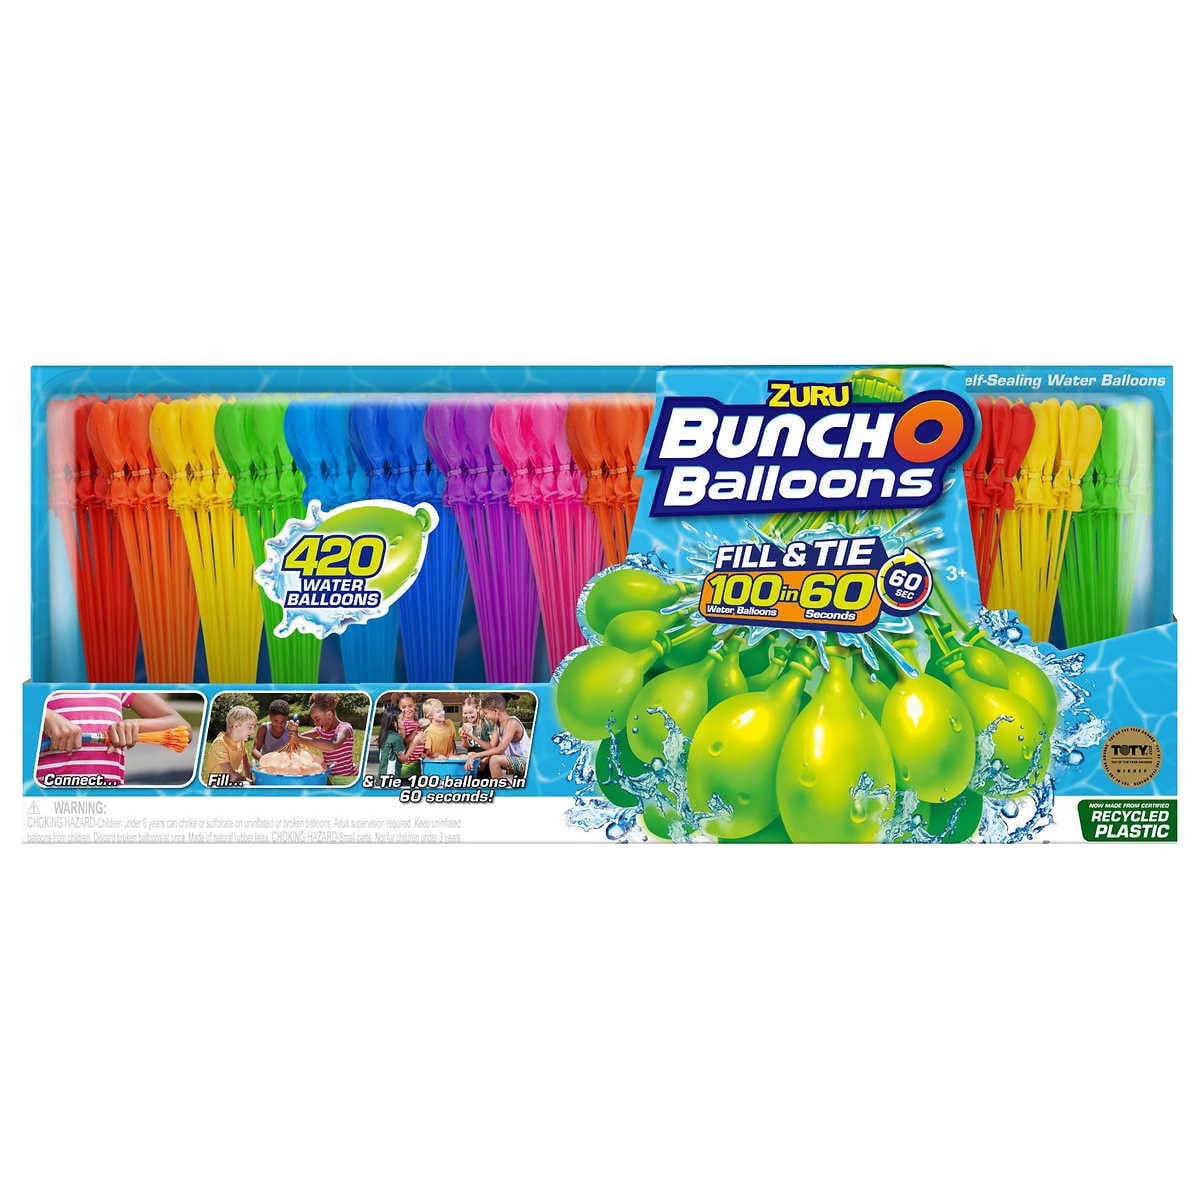 ZURU  BUNCHO BALLOONS 1 PKG FILL &  TIE 100 WATER BALLOONS 4TH JULY COLORS,MORE 